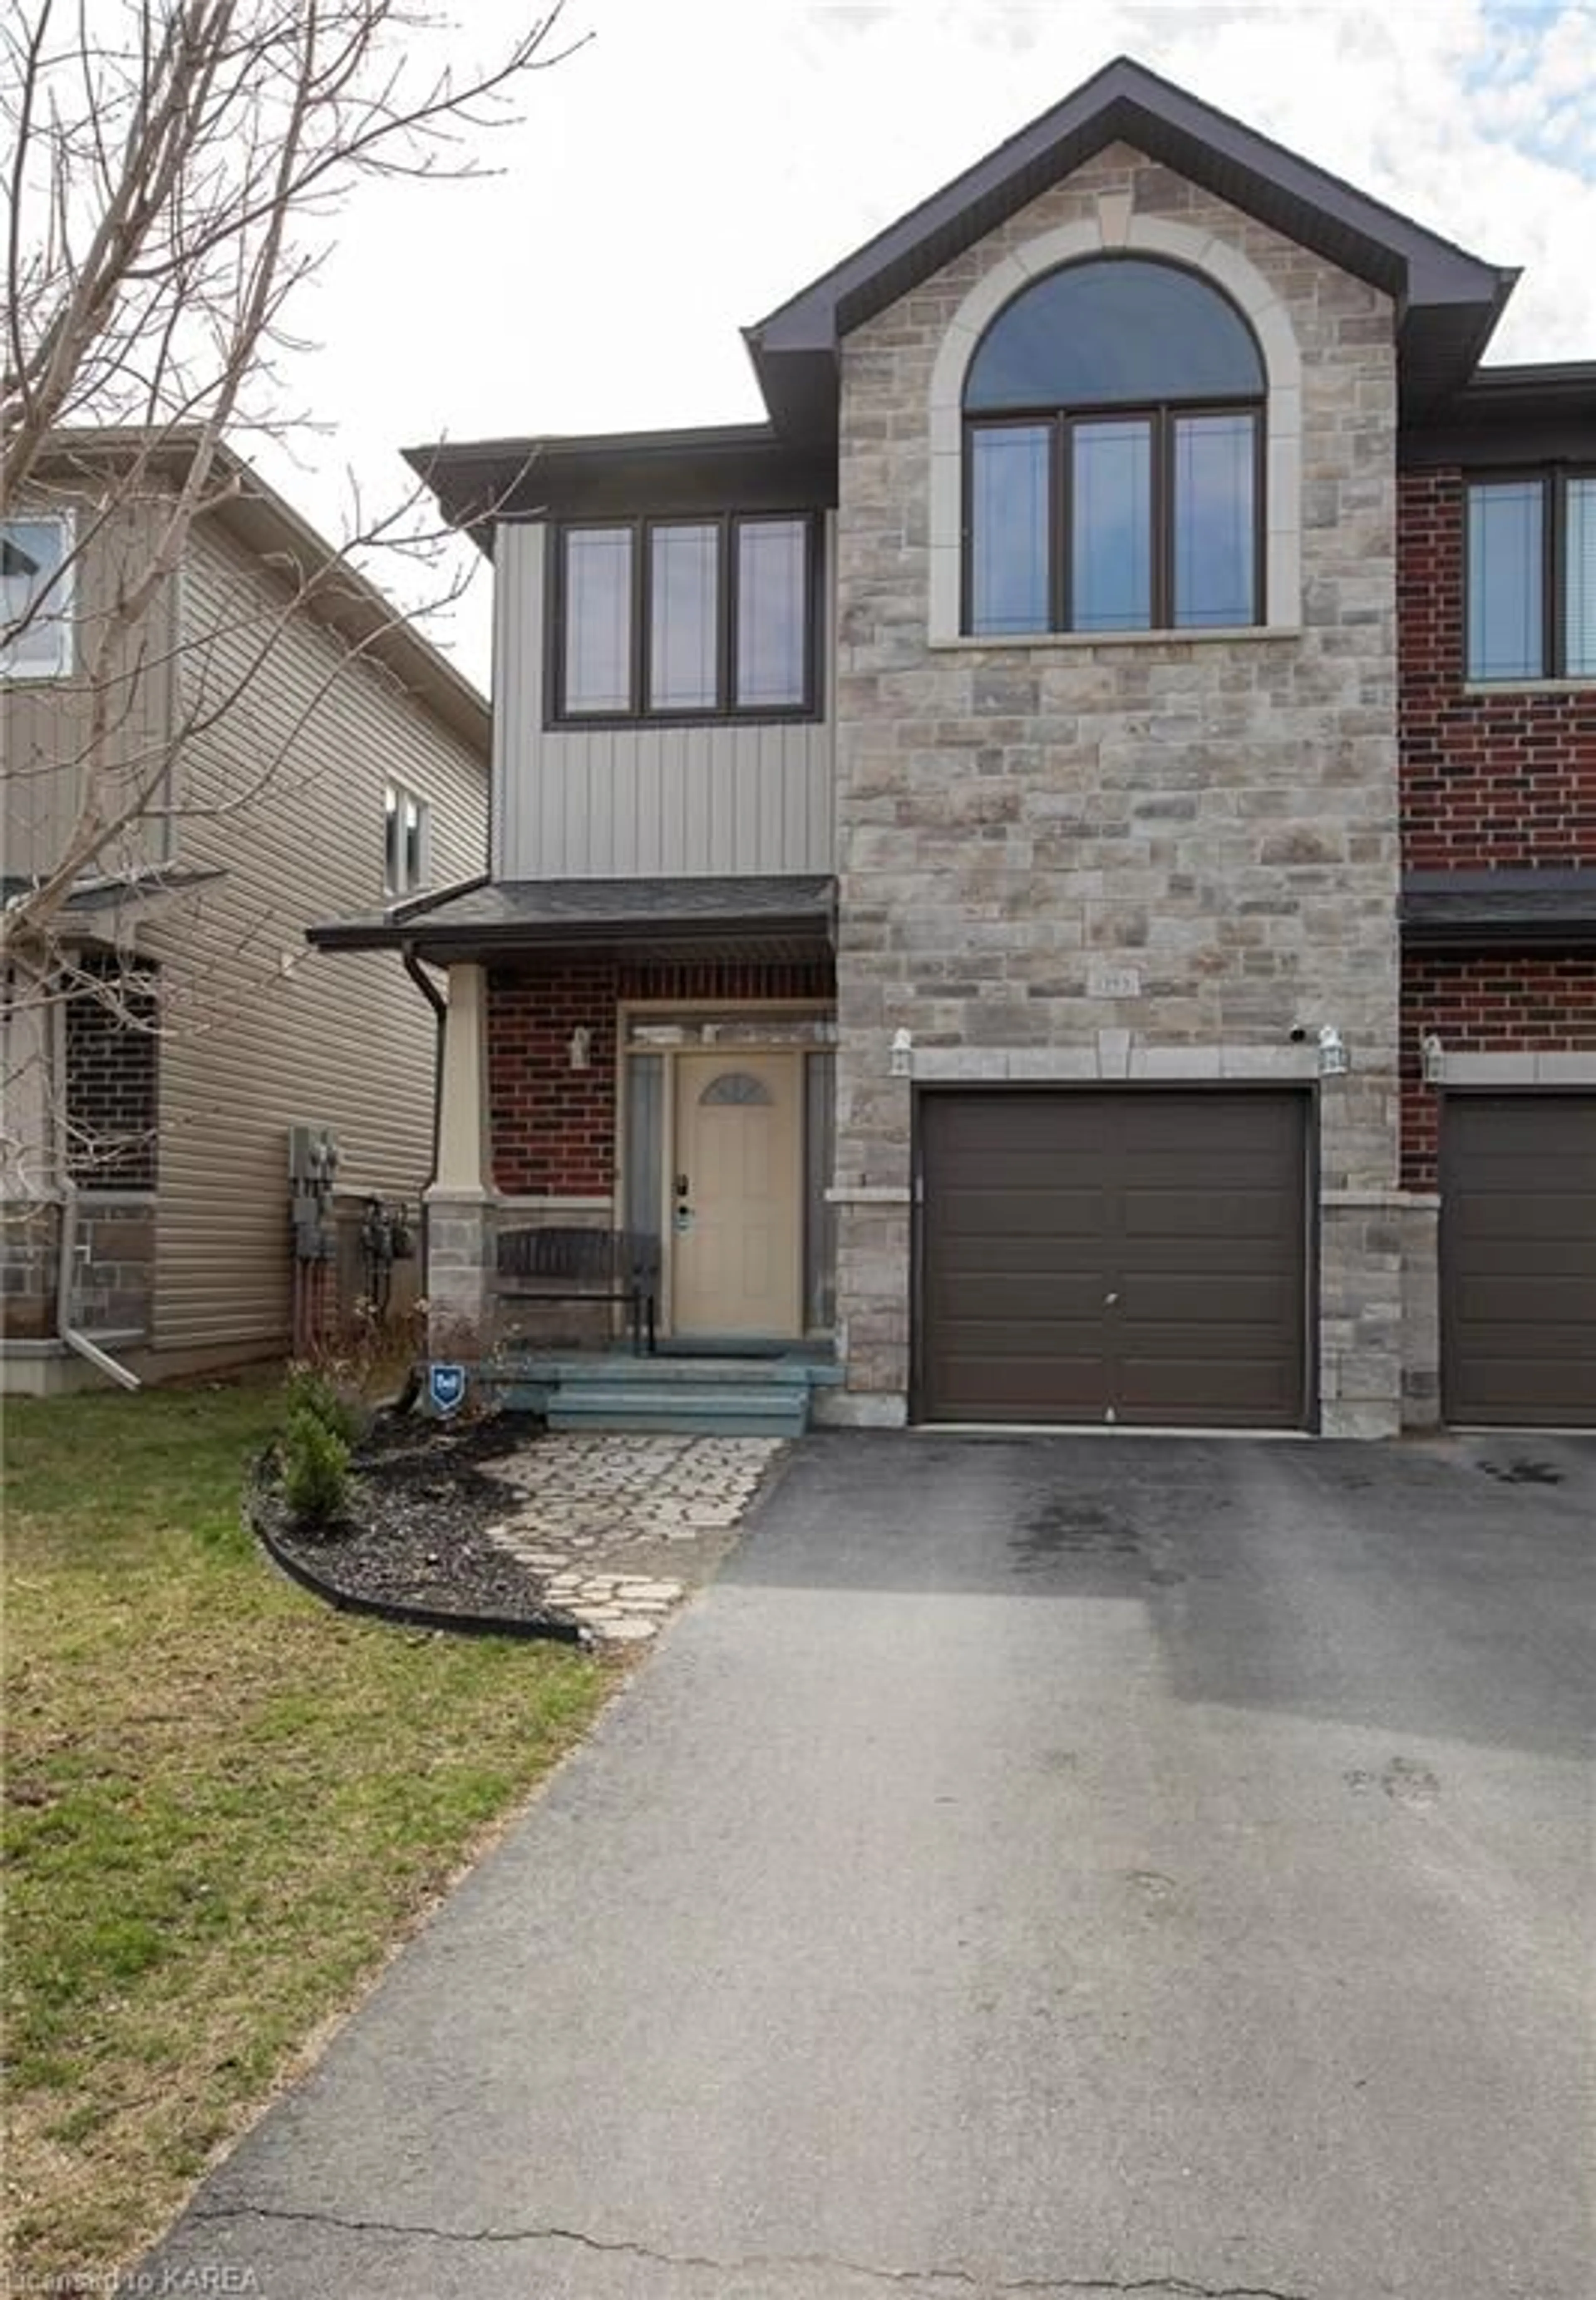 Home with brick exterior material for 1393 Tremont Dr, Kingston Ontario K7P 0K7